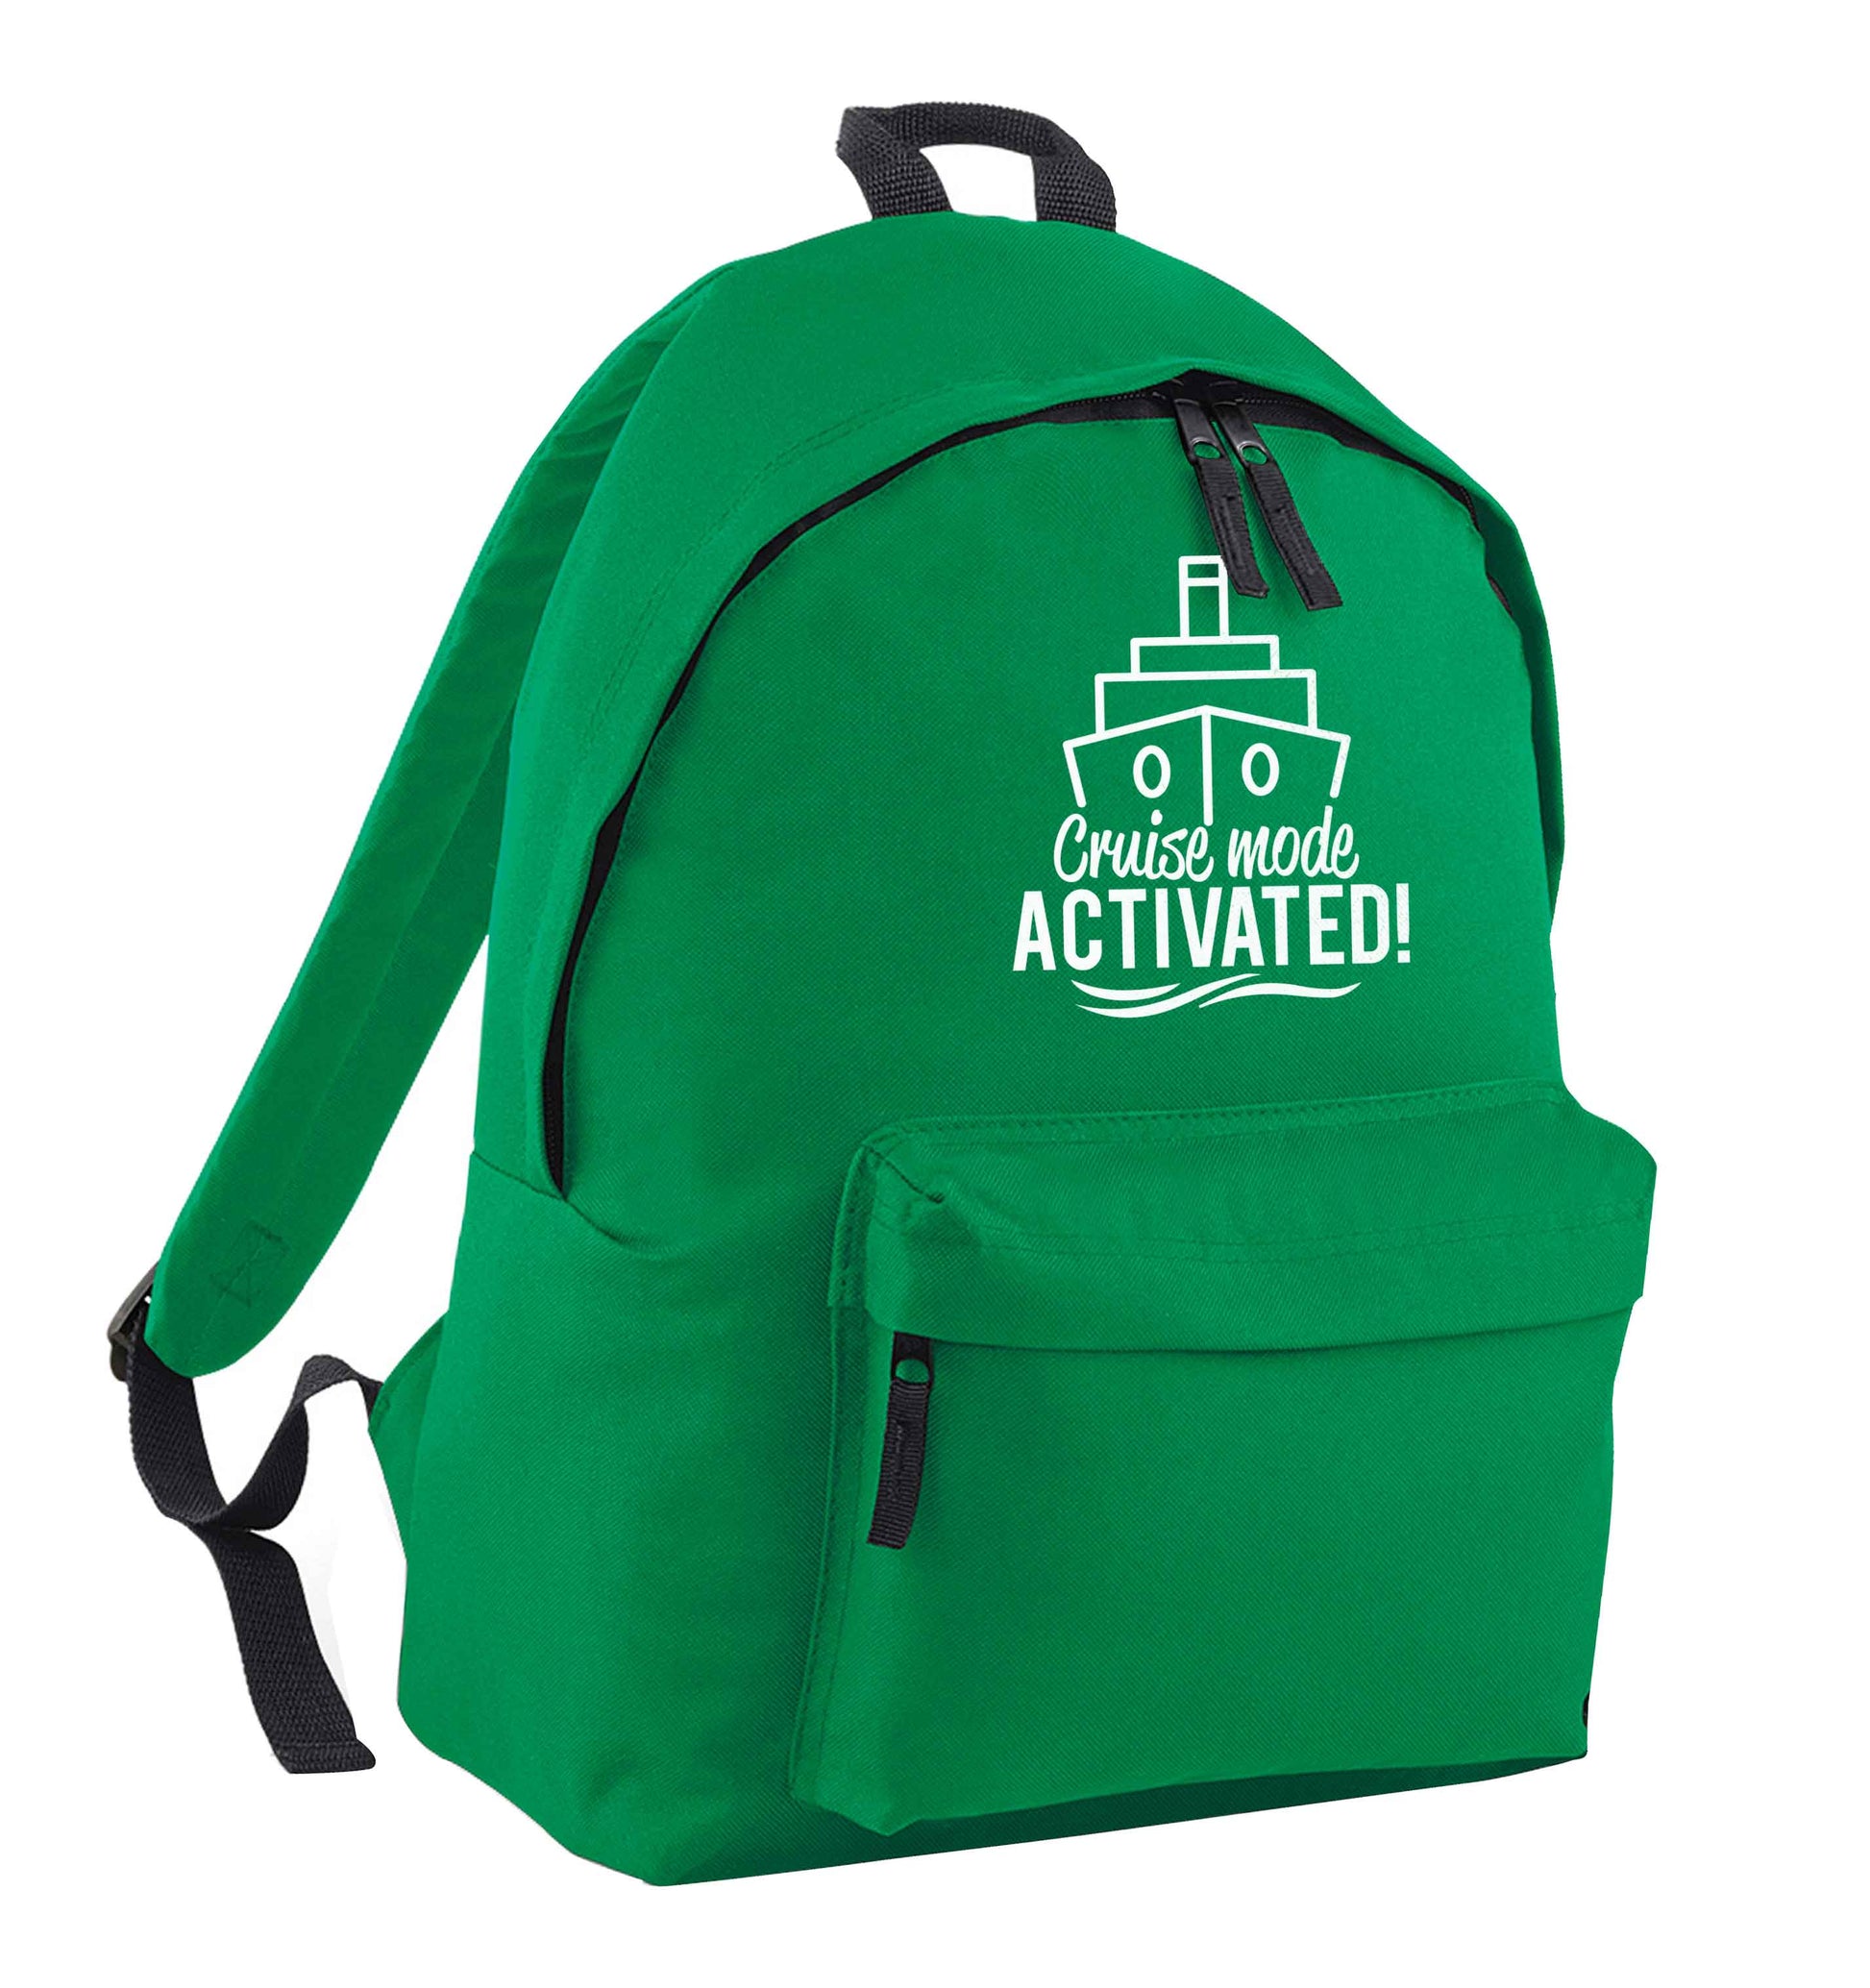 Cruise mode activated green adults backpack